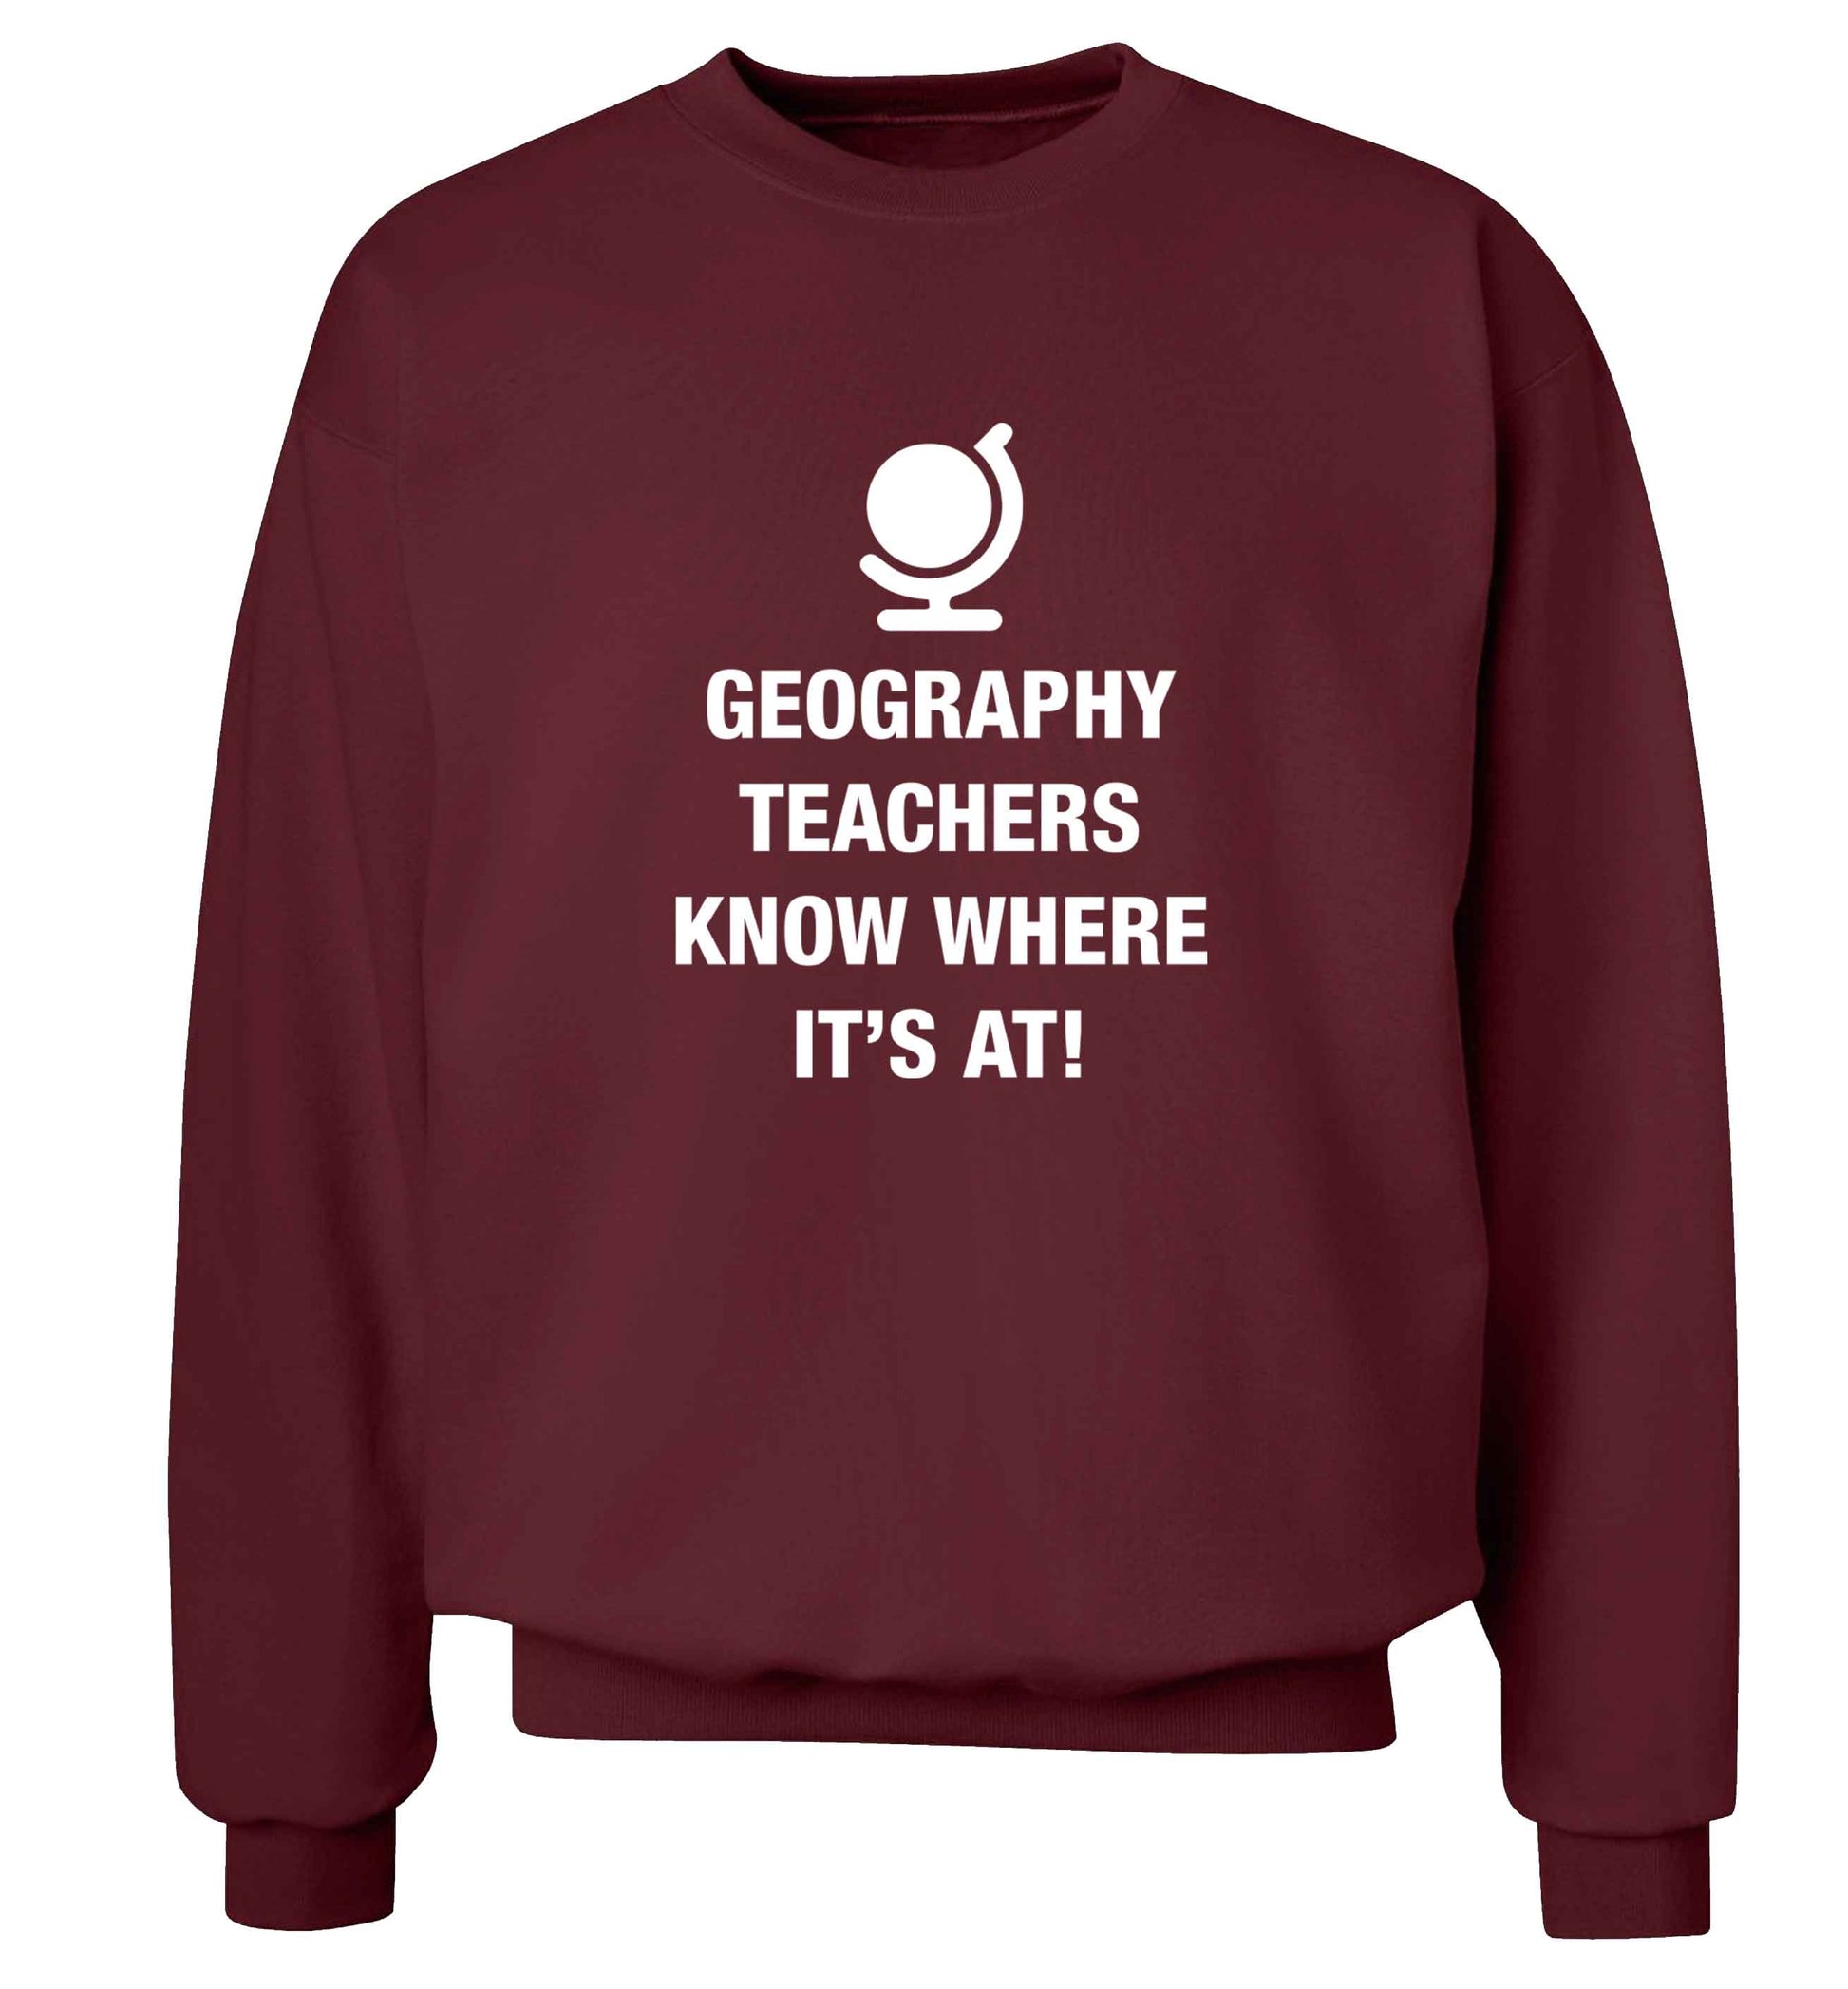 Geography teachers know where it's at adult's unisex maroon sweater 2XL